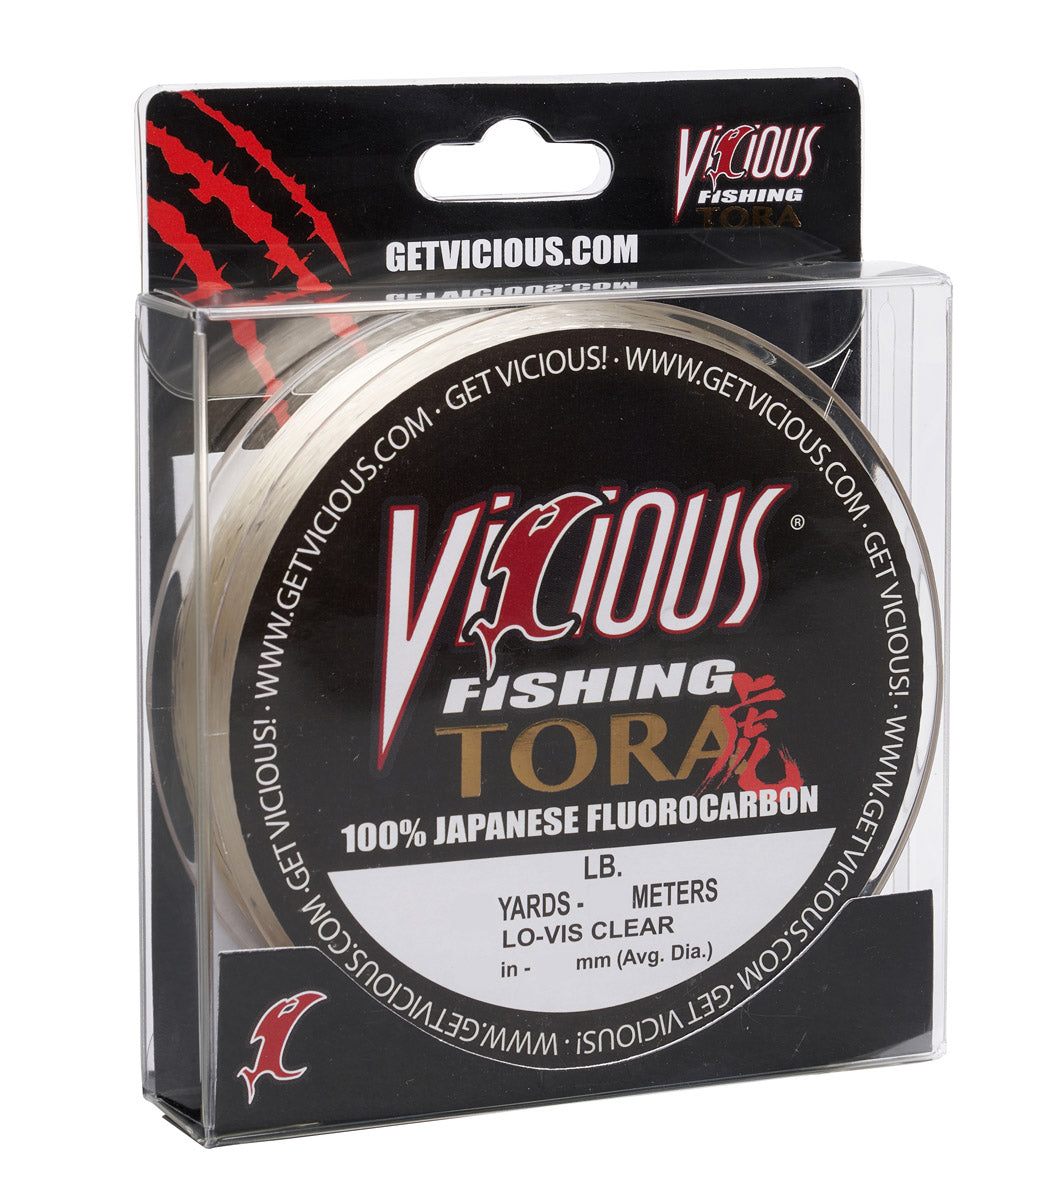 Vicious Fishing 100% Fluorocarbon 200 Yards Clear - 12 lb.